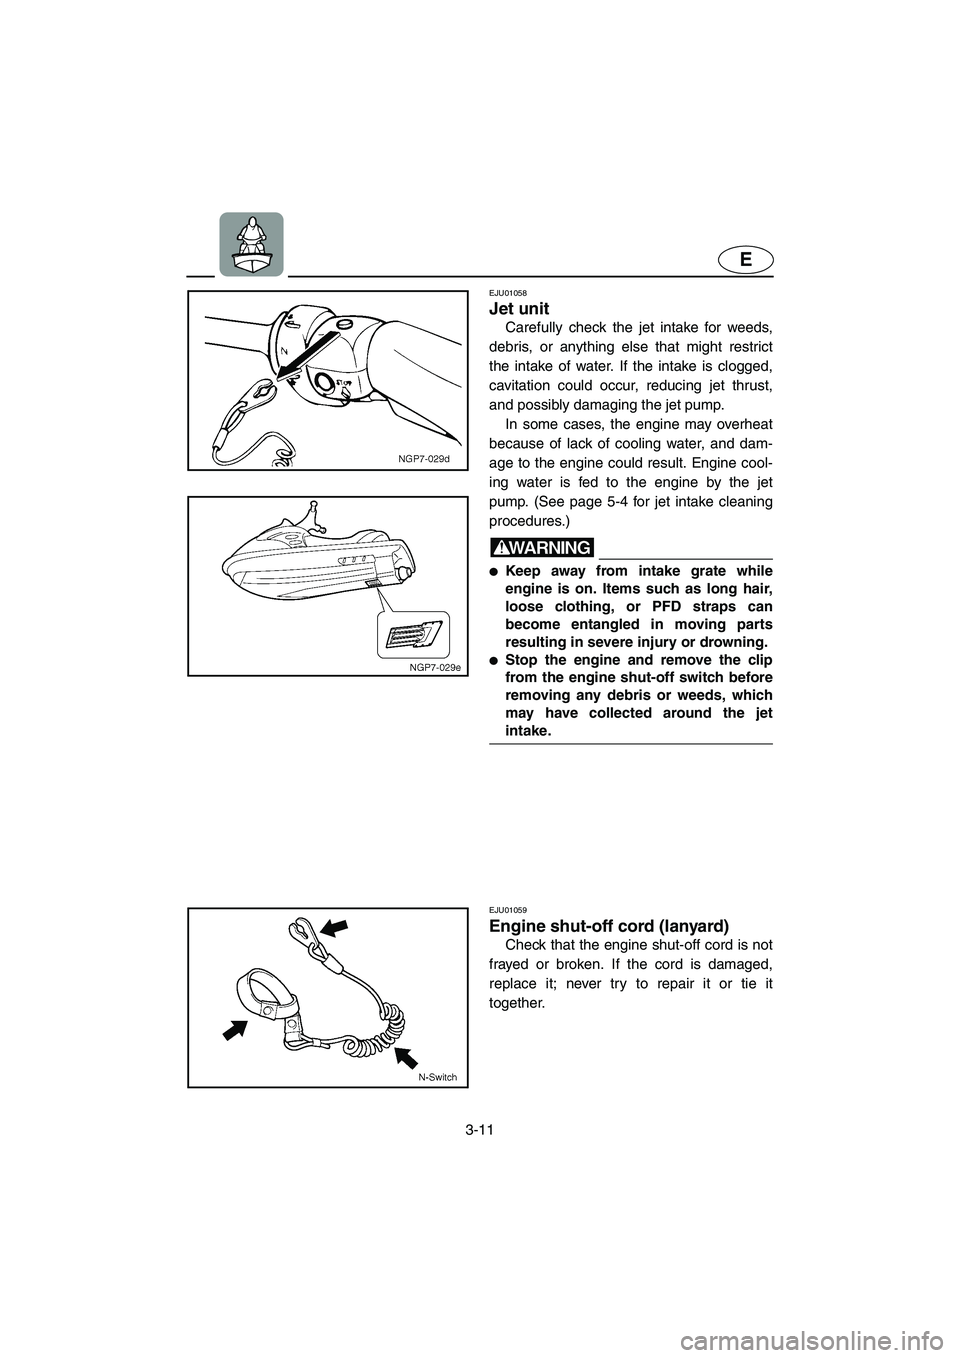 YAMAHA GP800R 2003  Owners Manual 3-11
E
EJU01058 
Jet unit  
Carefully check the jet intake for weeds,
debris, or anything else that might restrict
the intake of water. If the intake is clogged,
cavitation could occur, reducing jet t